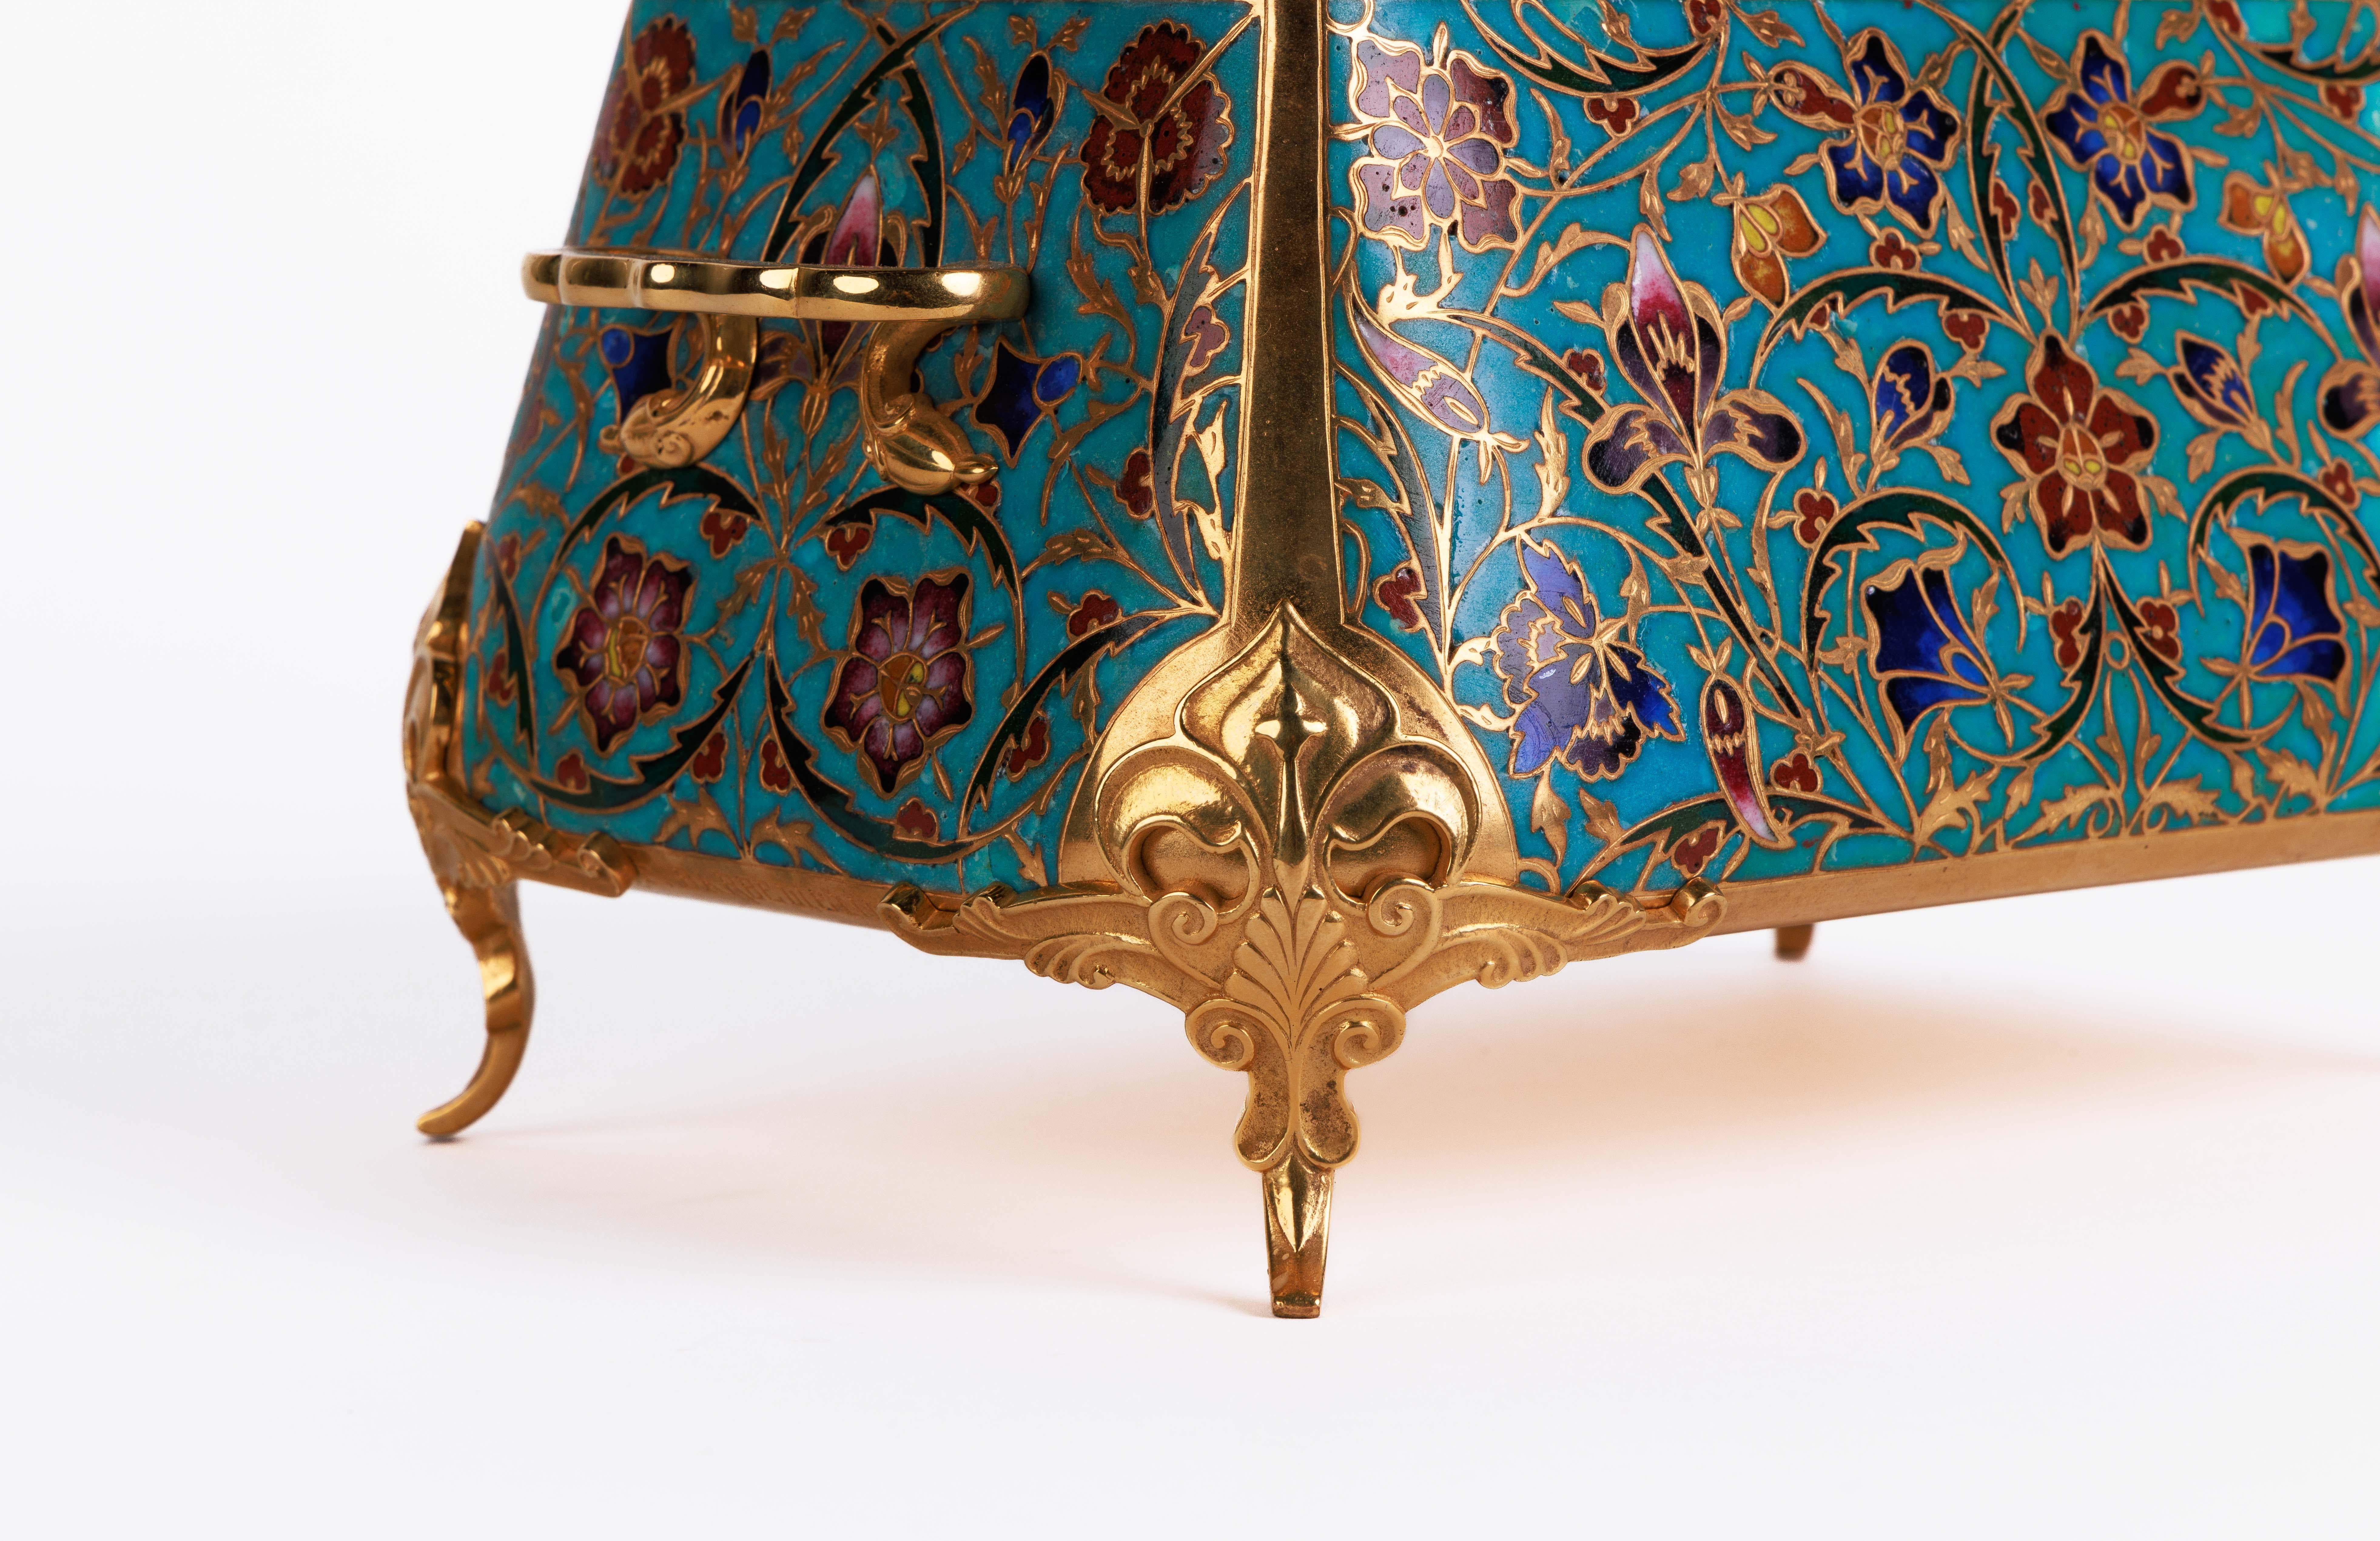 Napoleon III Ferdinand Barbedienne, A French Ormolu and Champleve Enamel Jardiniere, C. 1870 For Sale